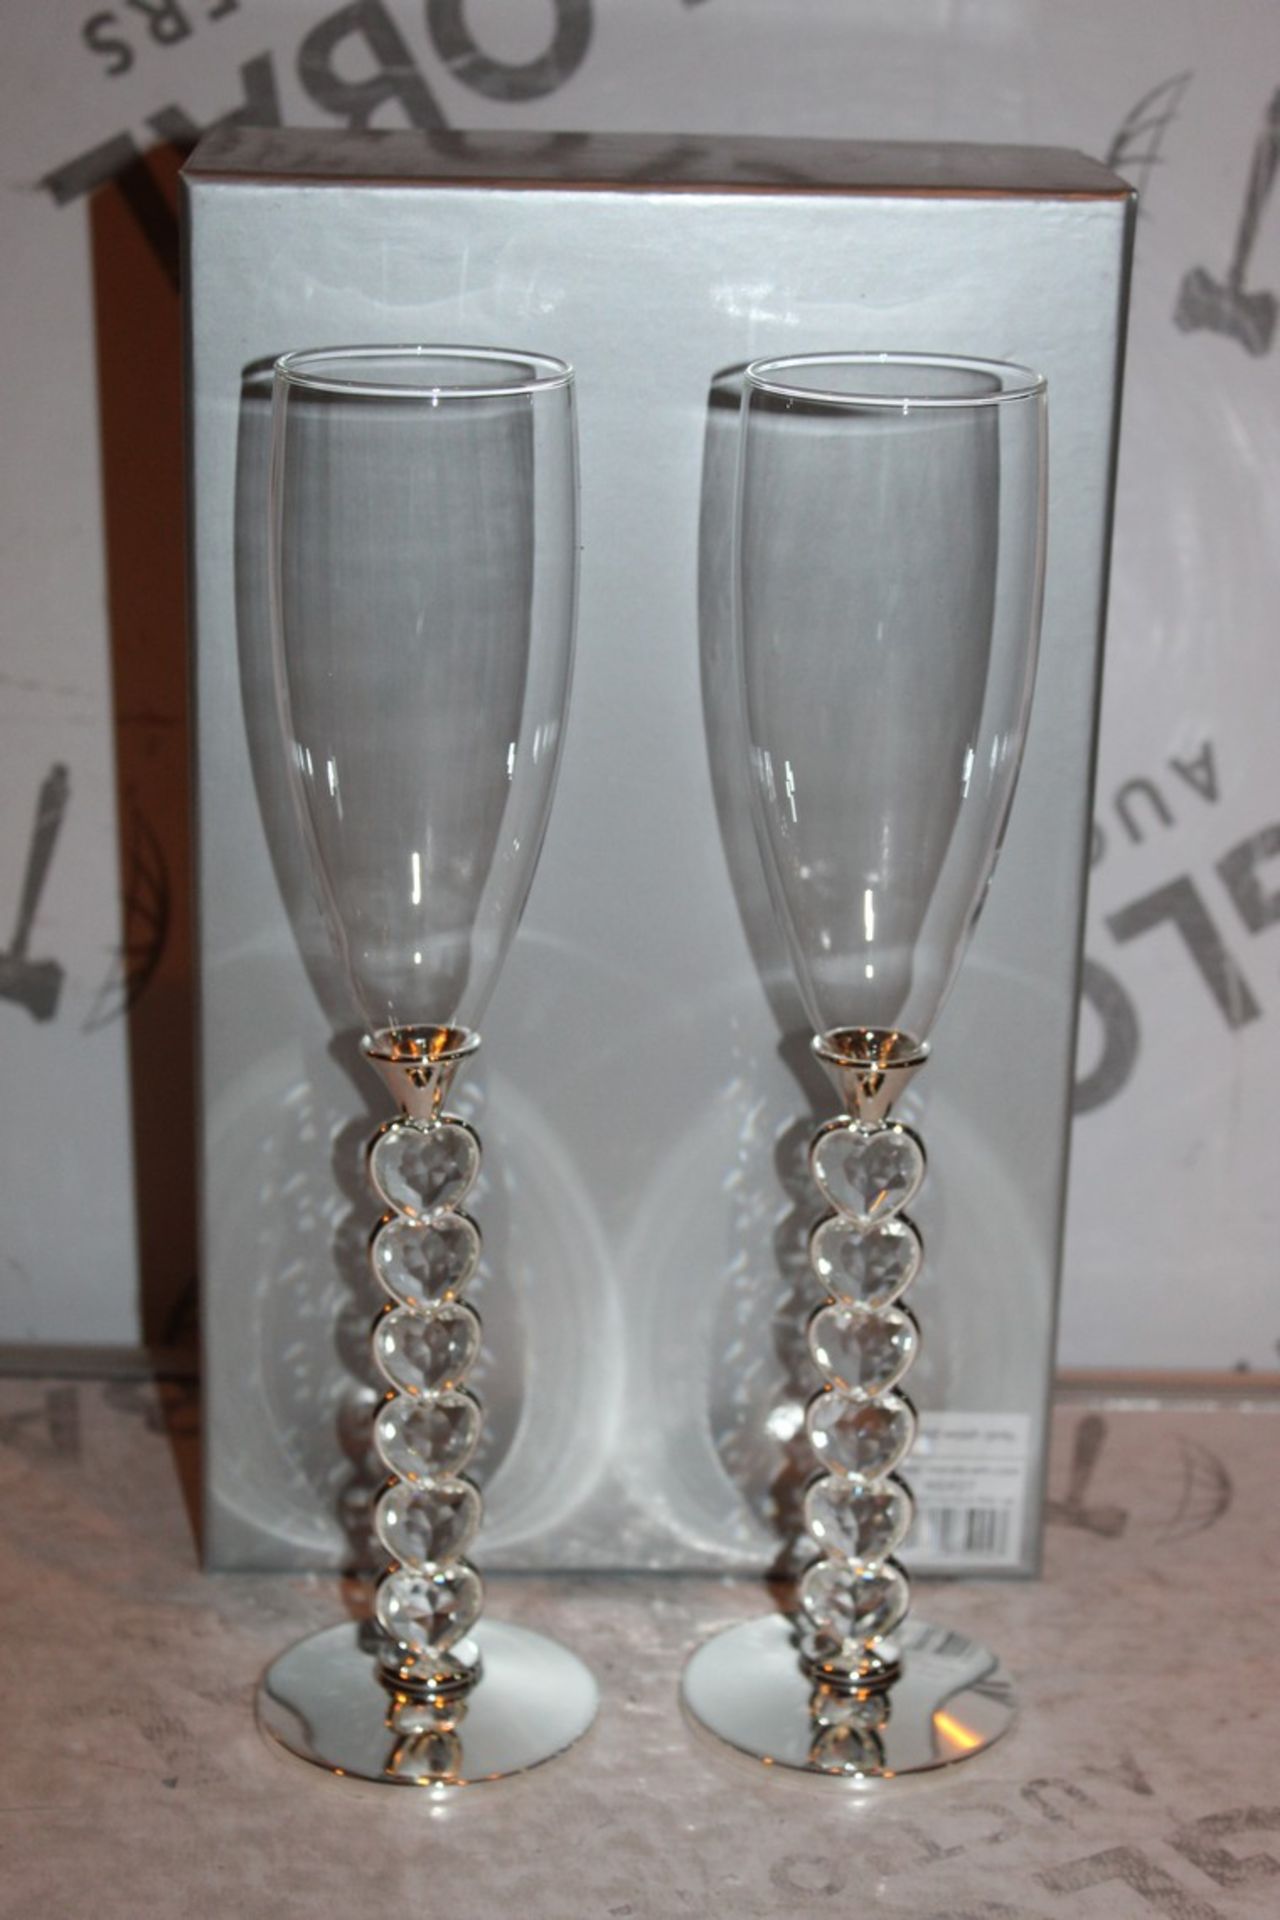 Boxed Pair of Heart Stem Lovers Champagne Flutes RRP £24.99 a Set